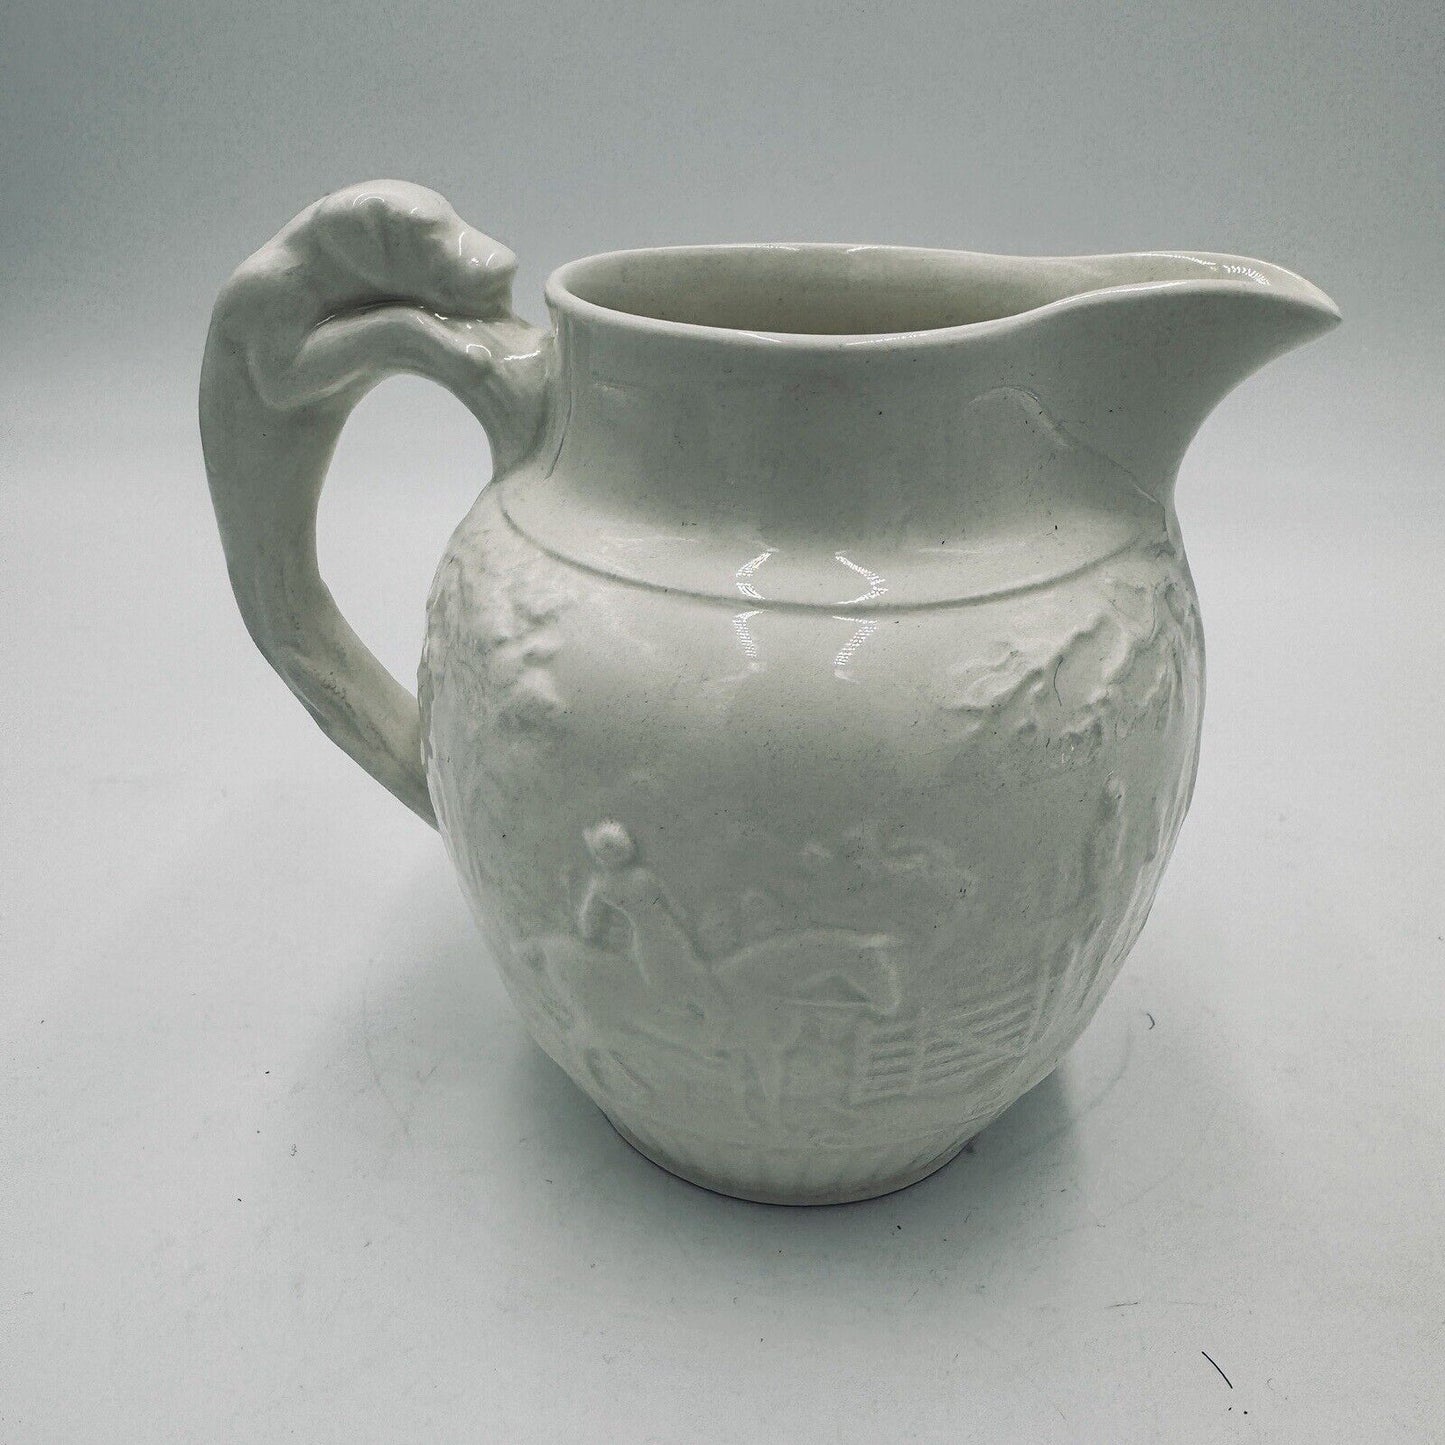 Antique Wedgwood Etruria 4.5” Pitcher Grazed White Hunting Scene Embossed #36